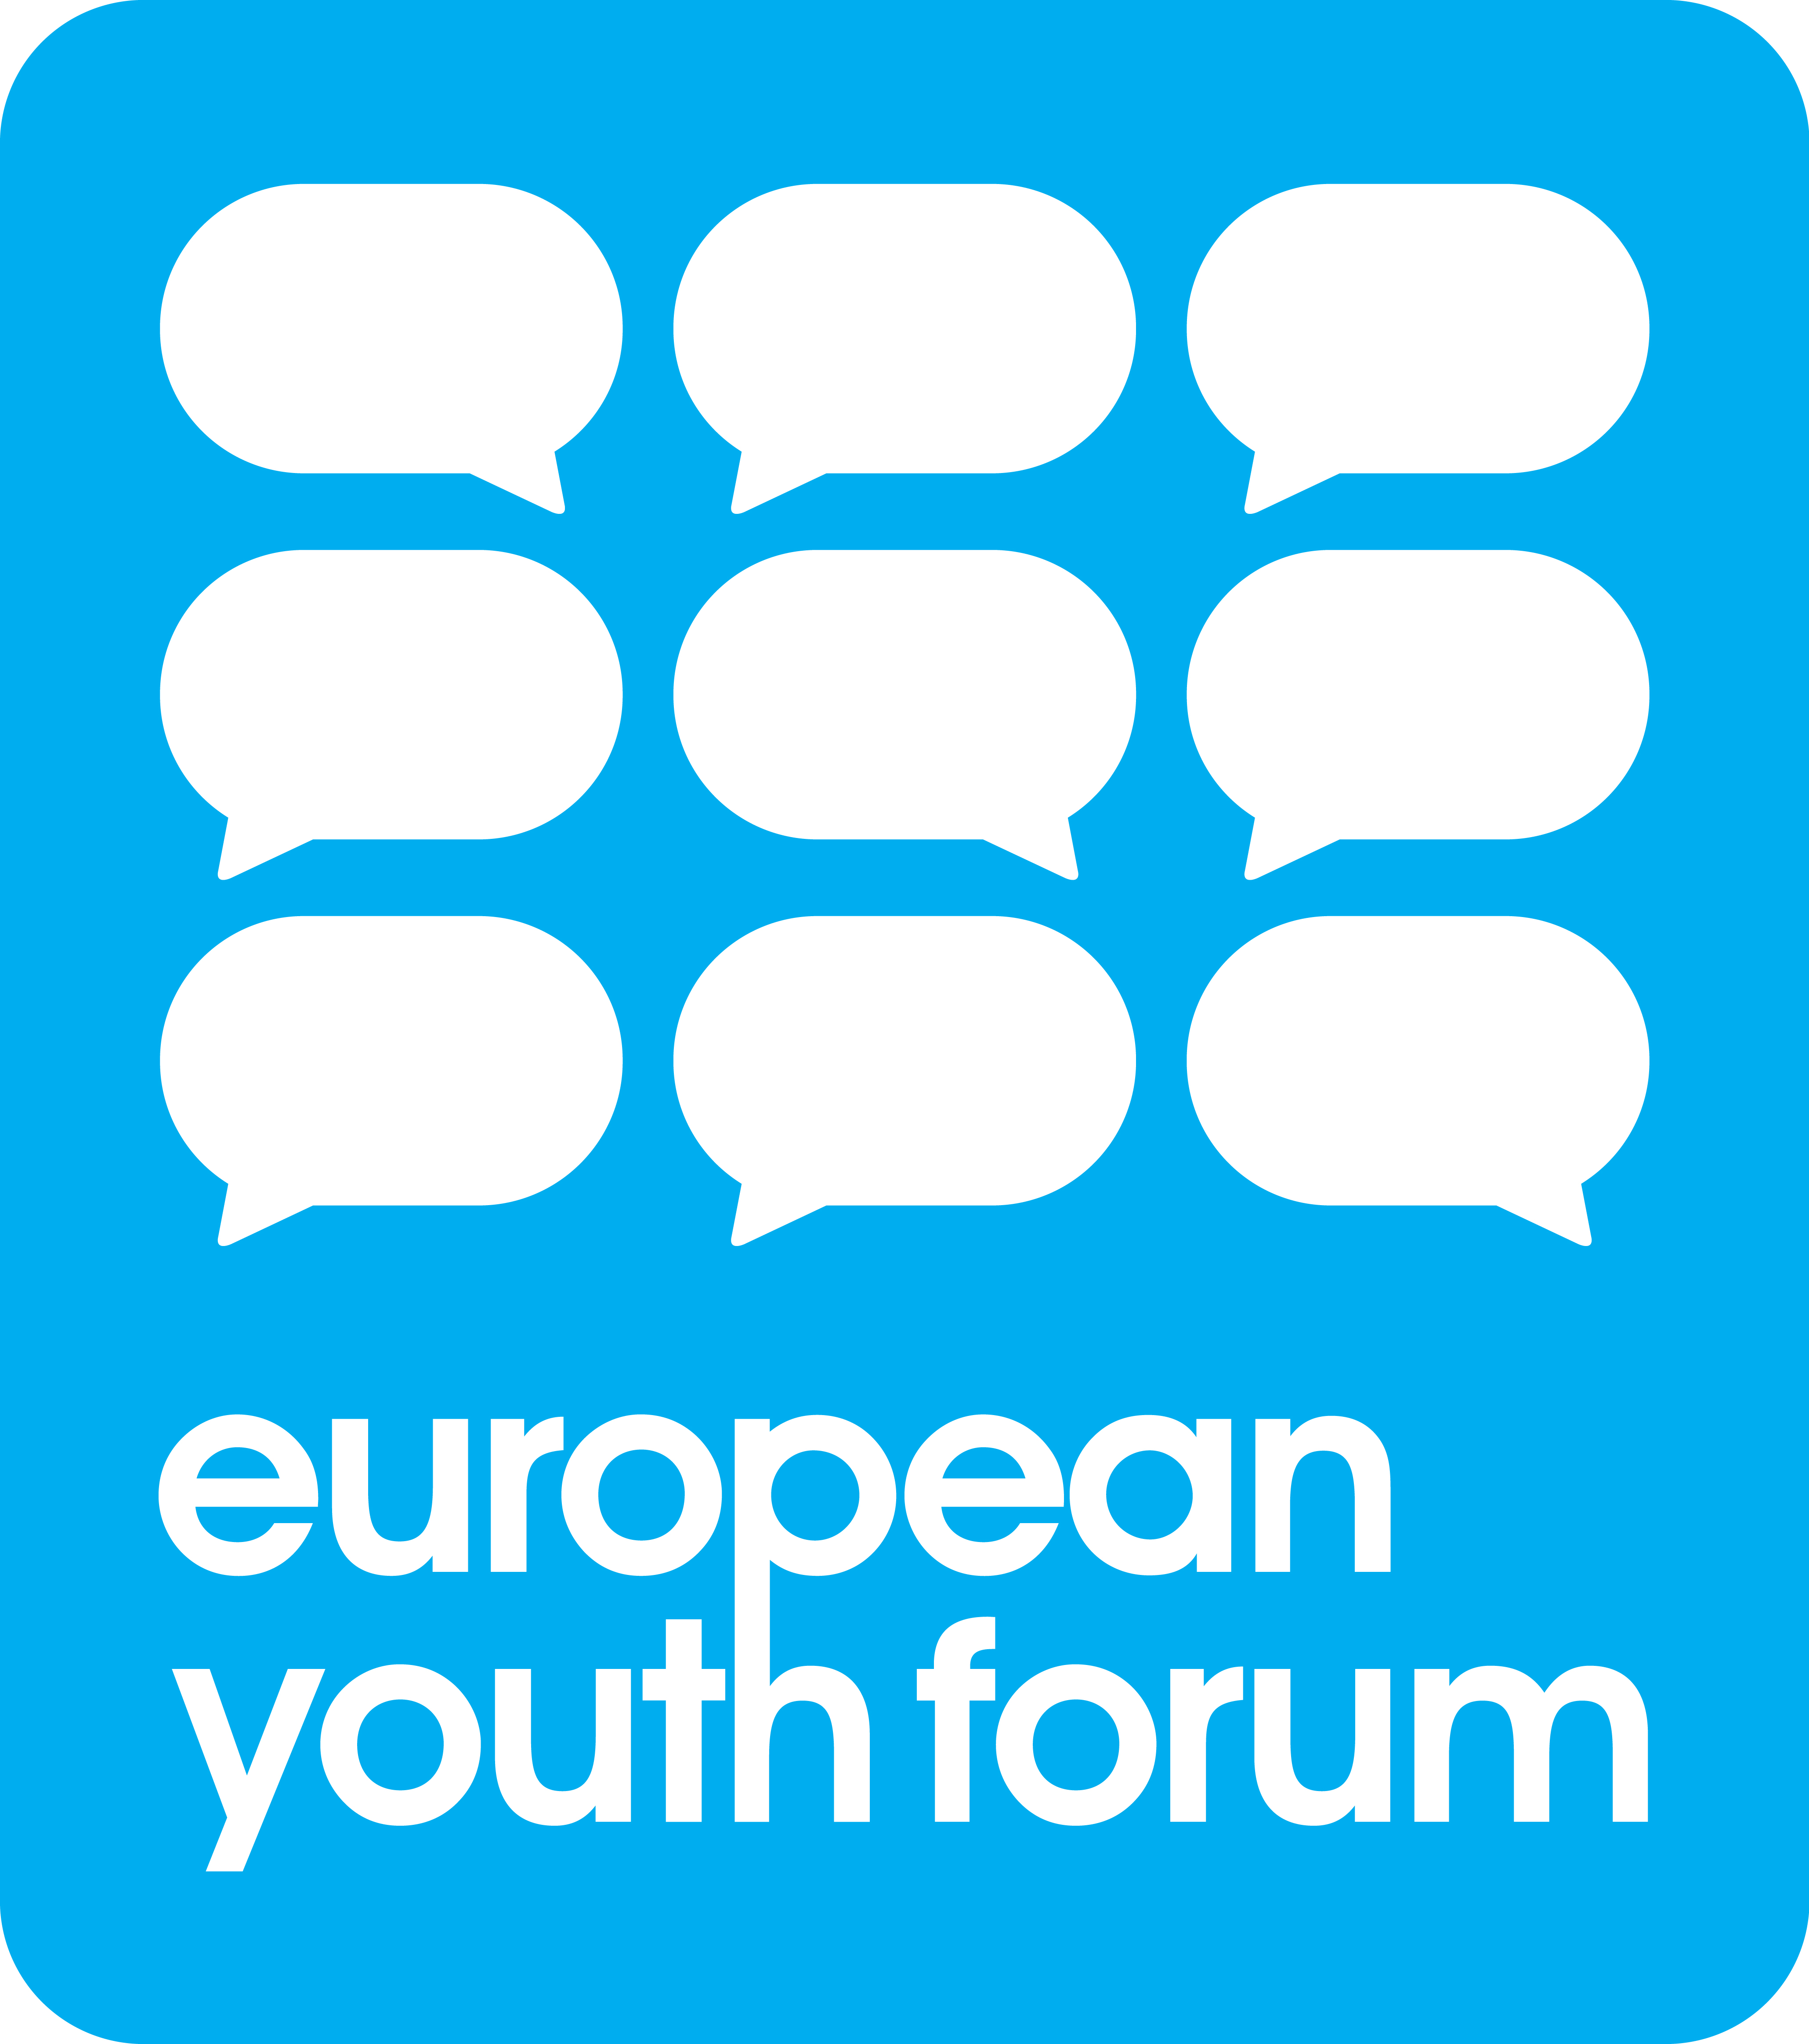 forum for youth investment